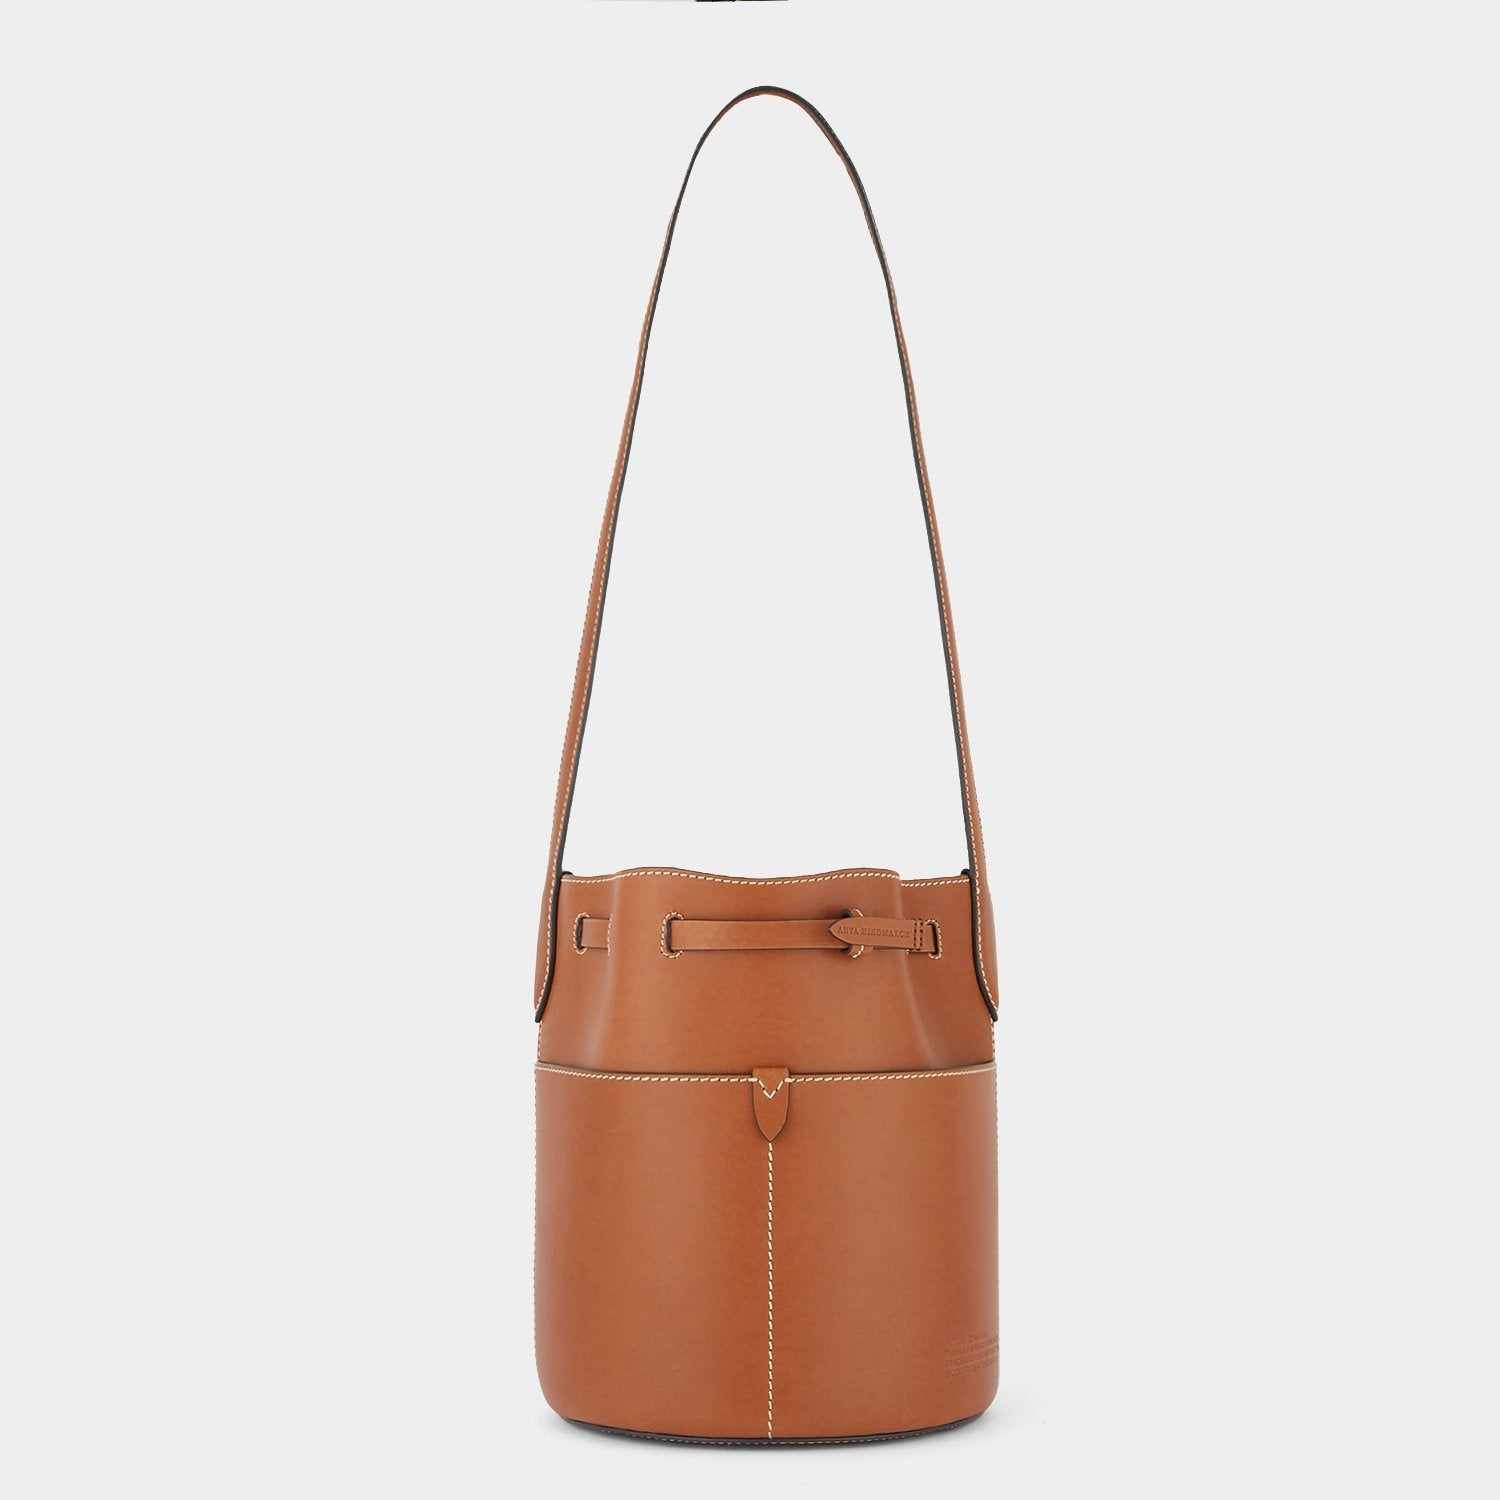 Return to Nature Small Bucket Bag -

                  
                    Compostable Leather in Tan -
                  

                  Anya Hindmarch EU
